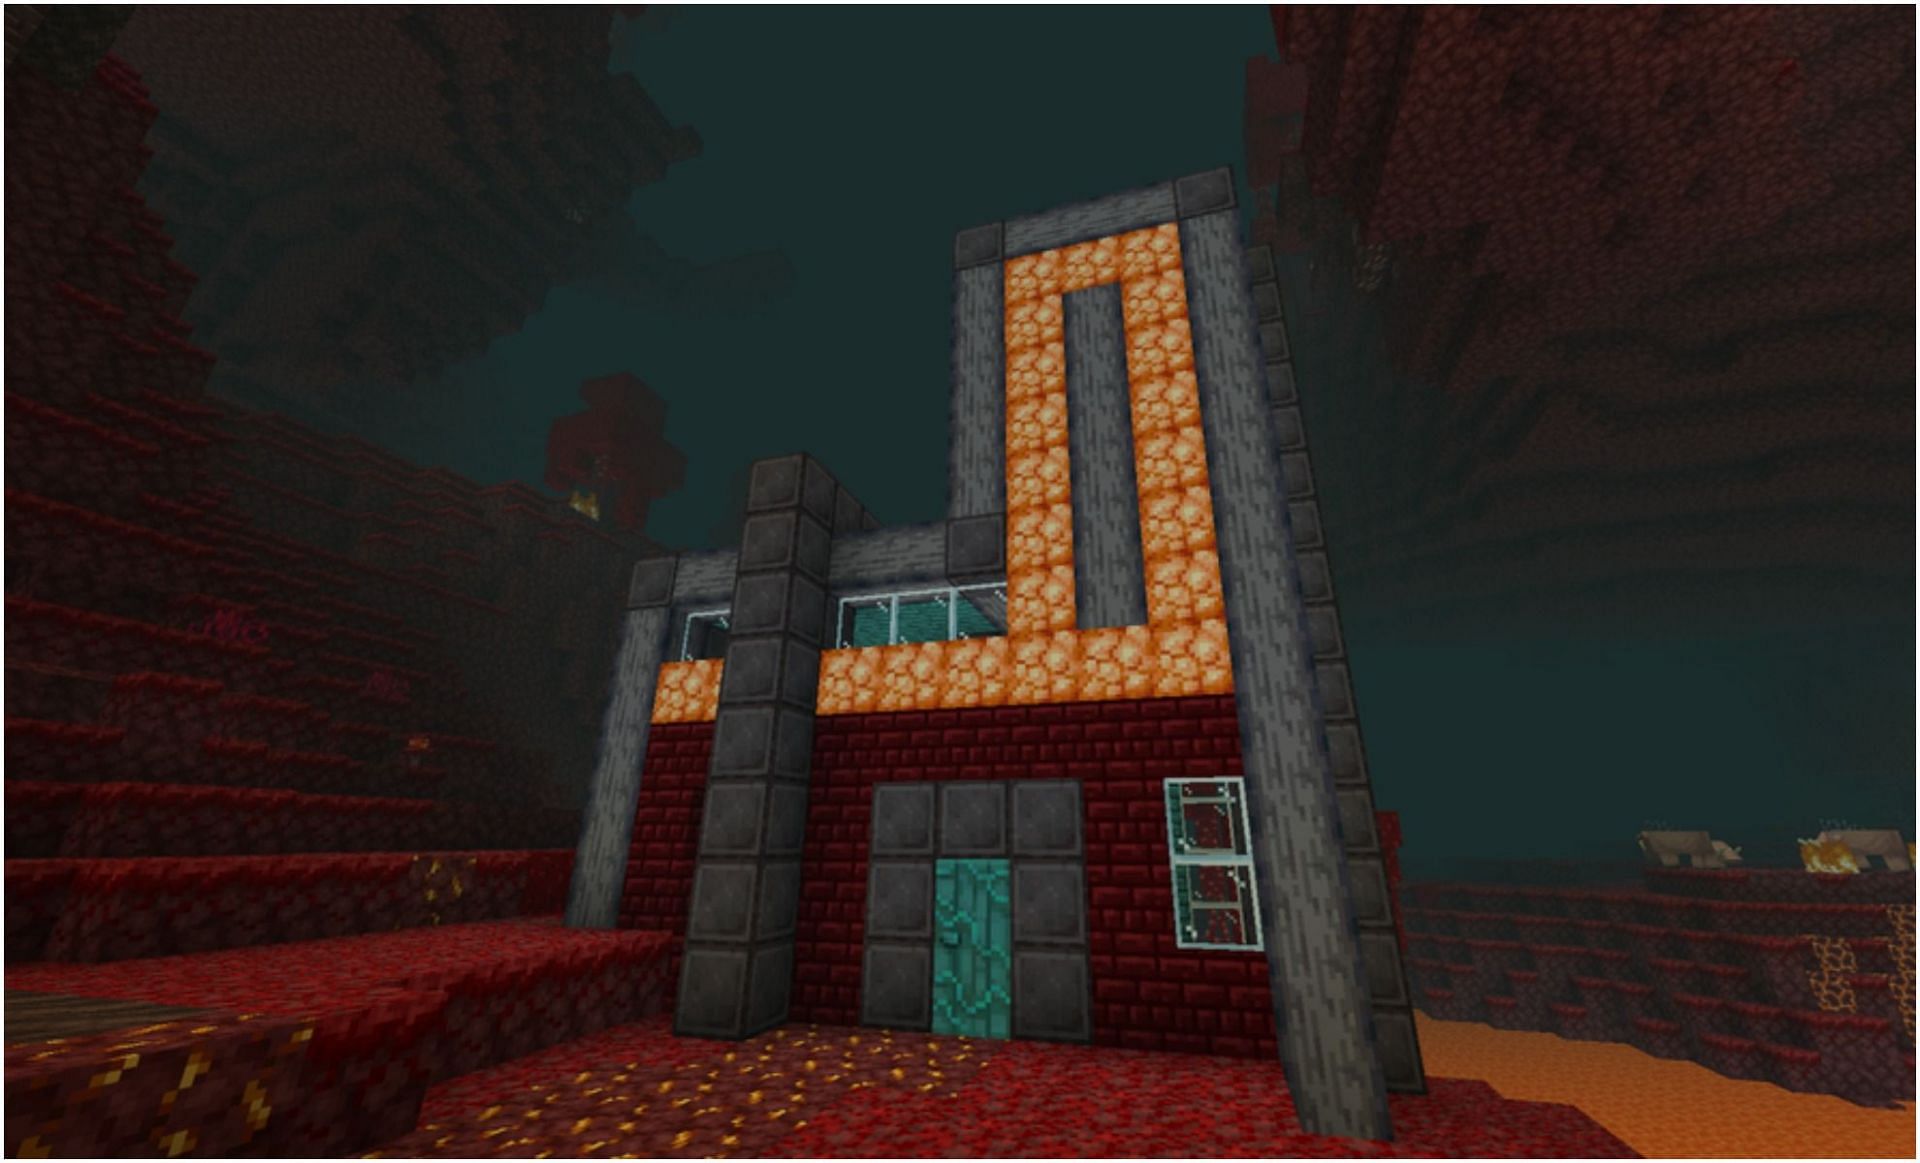 A house built in the Nether (Image via u/legoworldplays on Reddit)